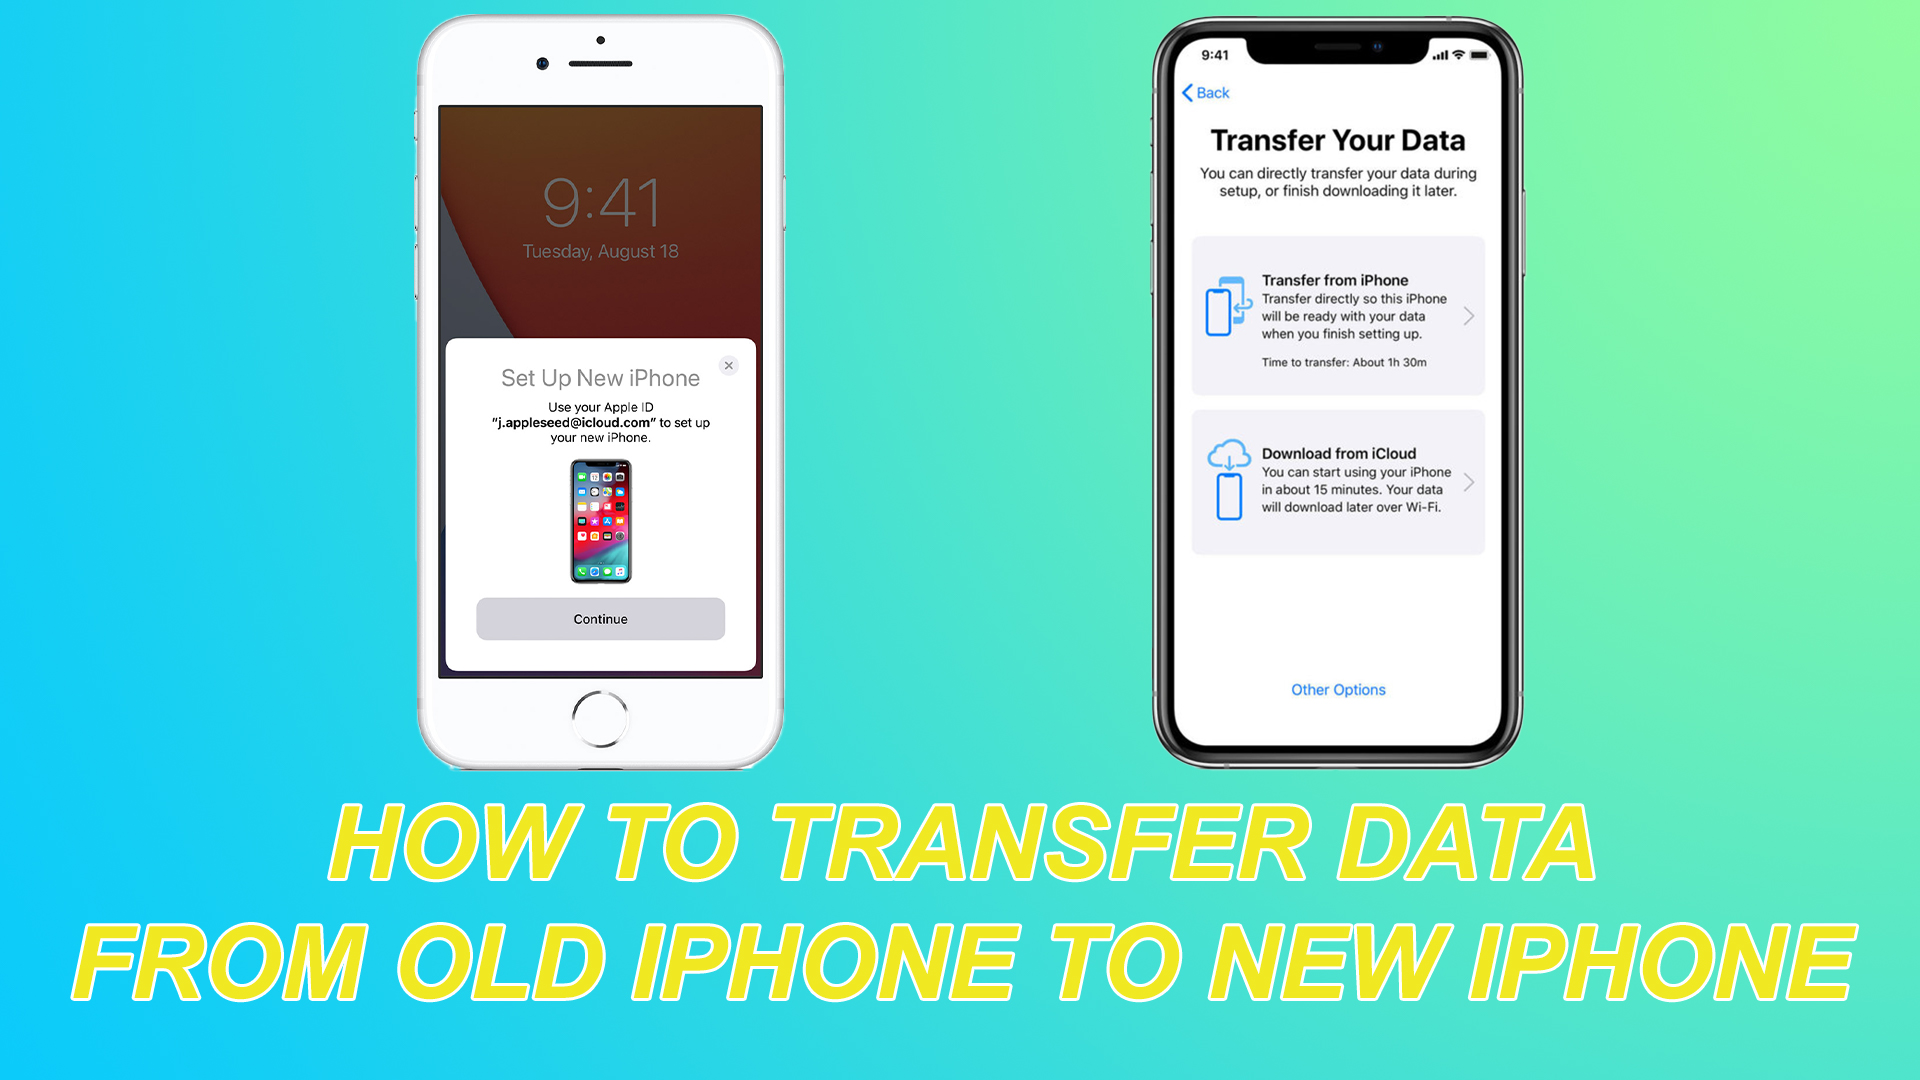 How To Transfer Data From Old iPhone To New iPhone